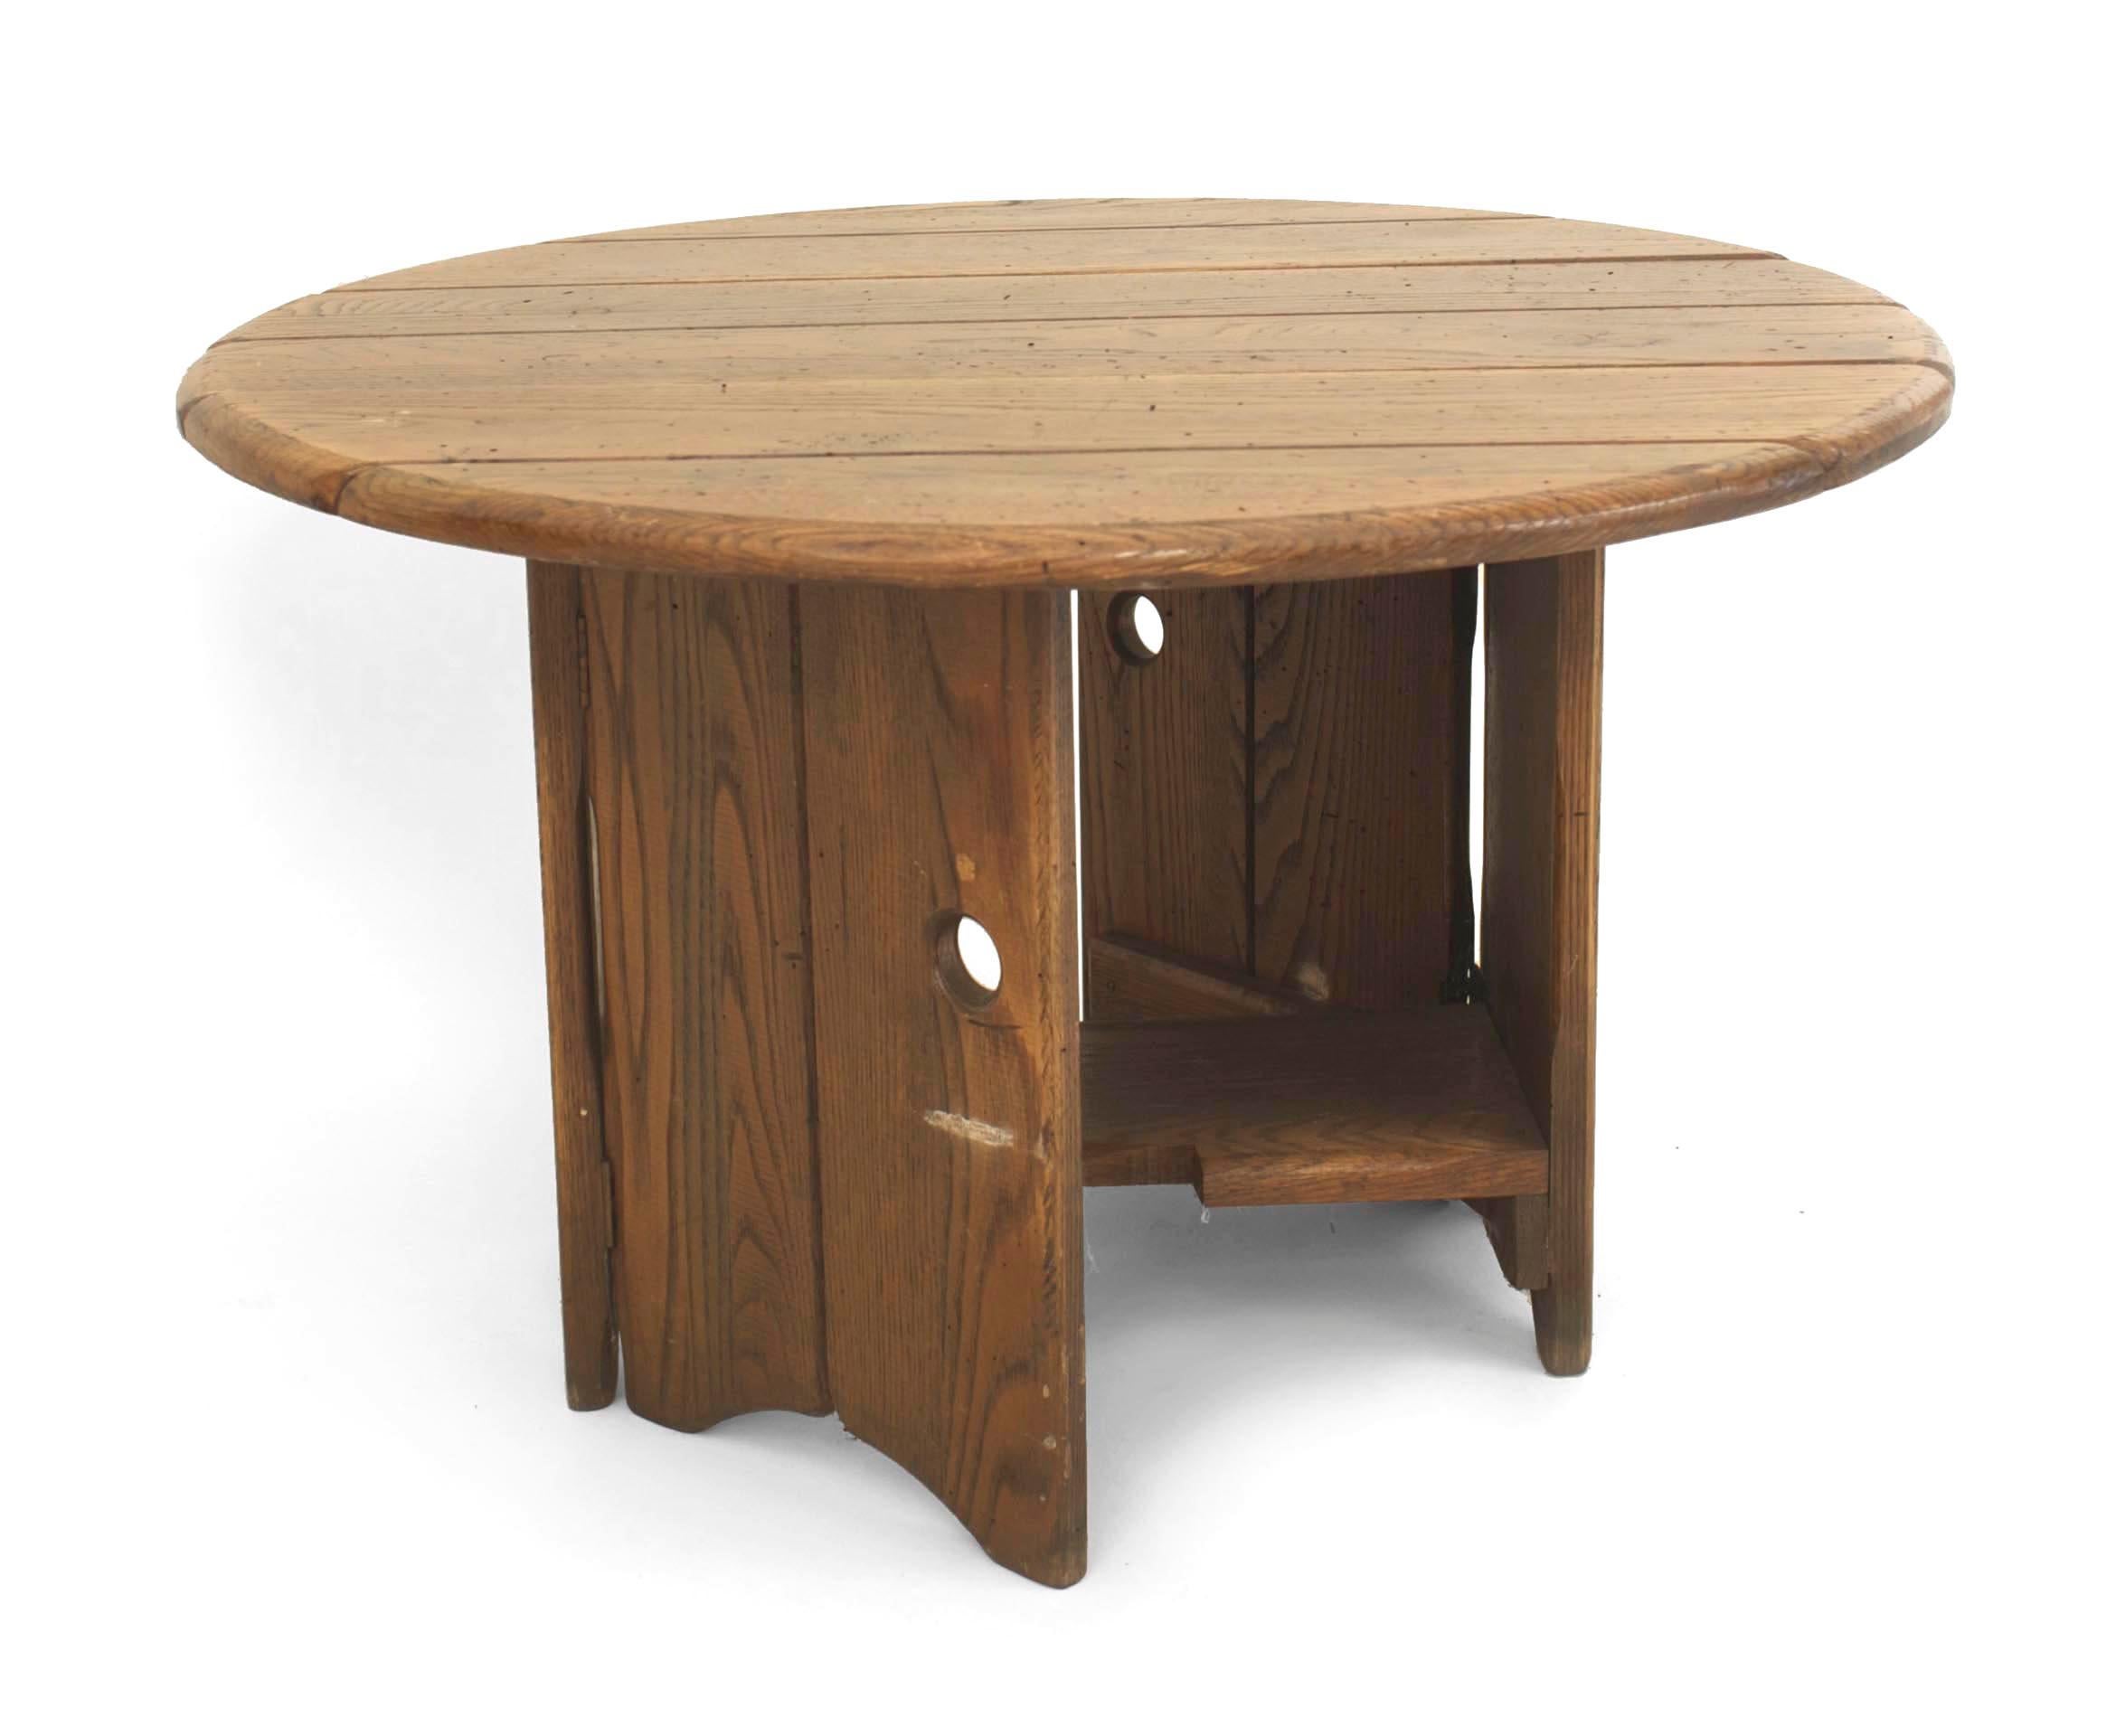 American Mission-style Rustic Old Hickory round coffee table with a slat top with two drop leaves, a gate leg base and an interior shelf stretcher. (American Provincial label; OLD HICKORY brand)
